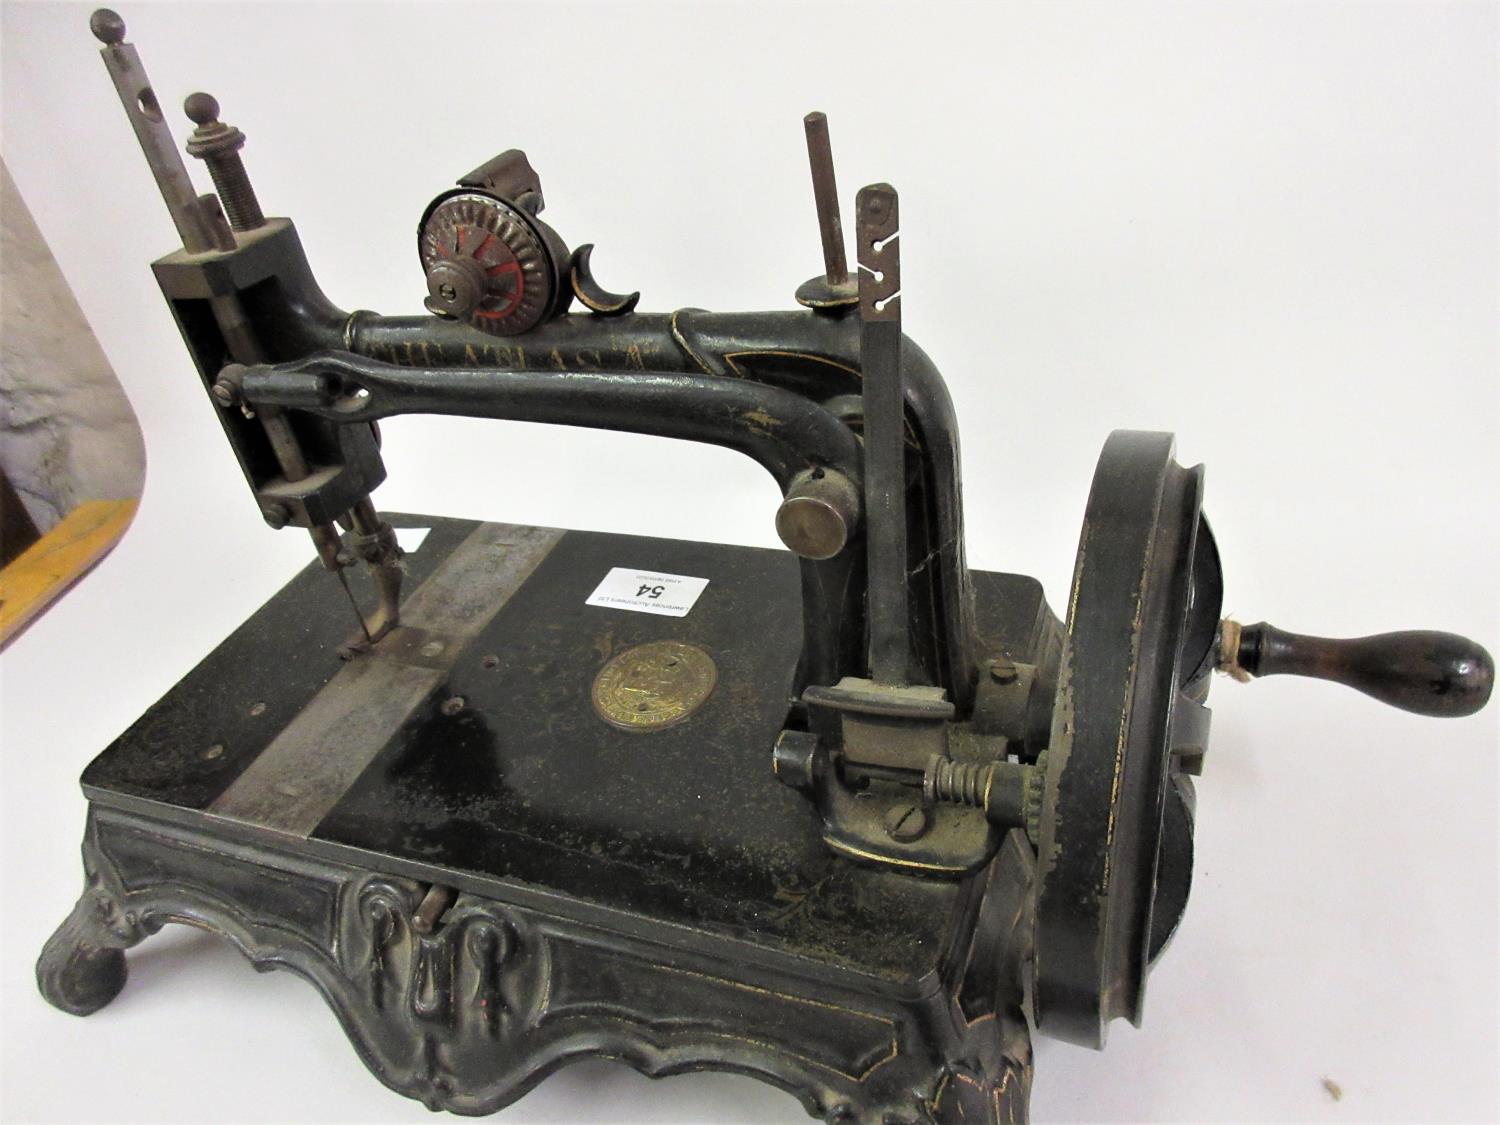 Early hand operated sewing machine by the Atlas Sewing Machine Company, London - Image 3 of 3